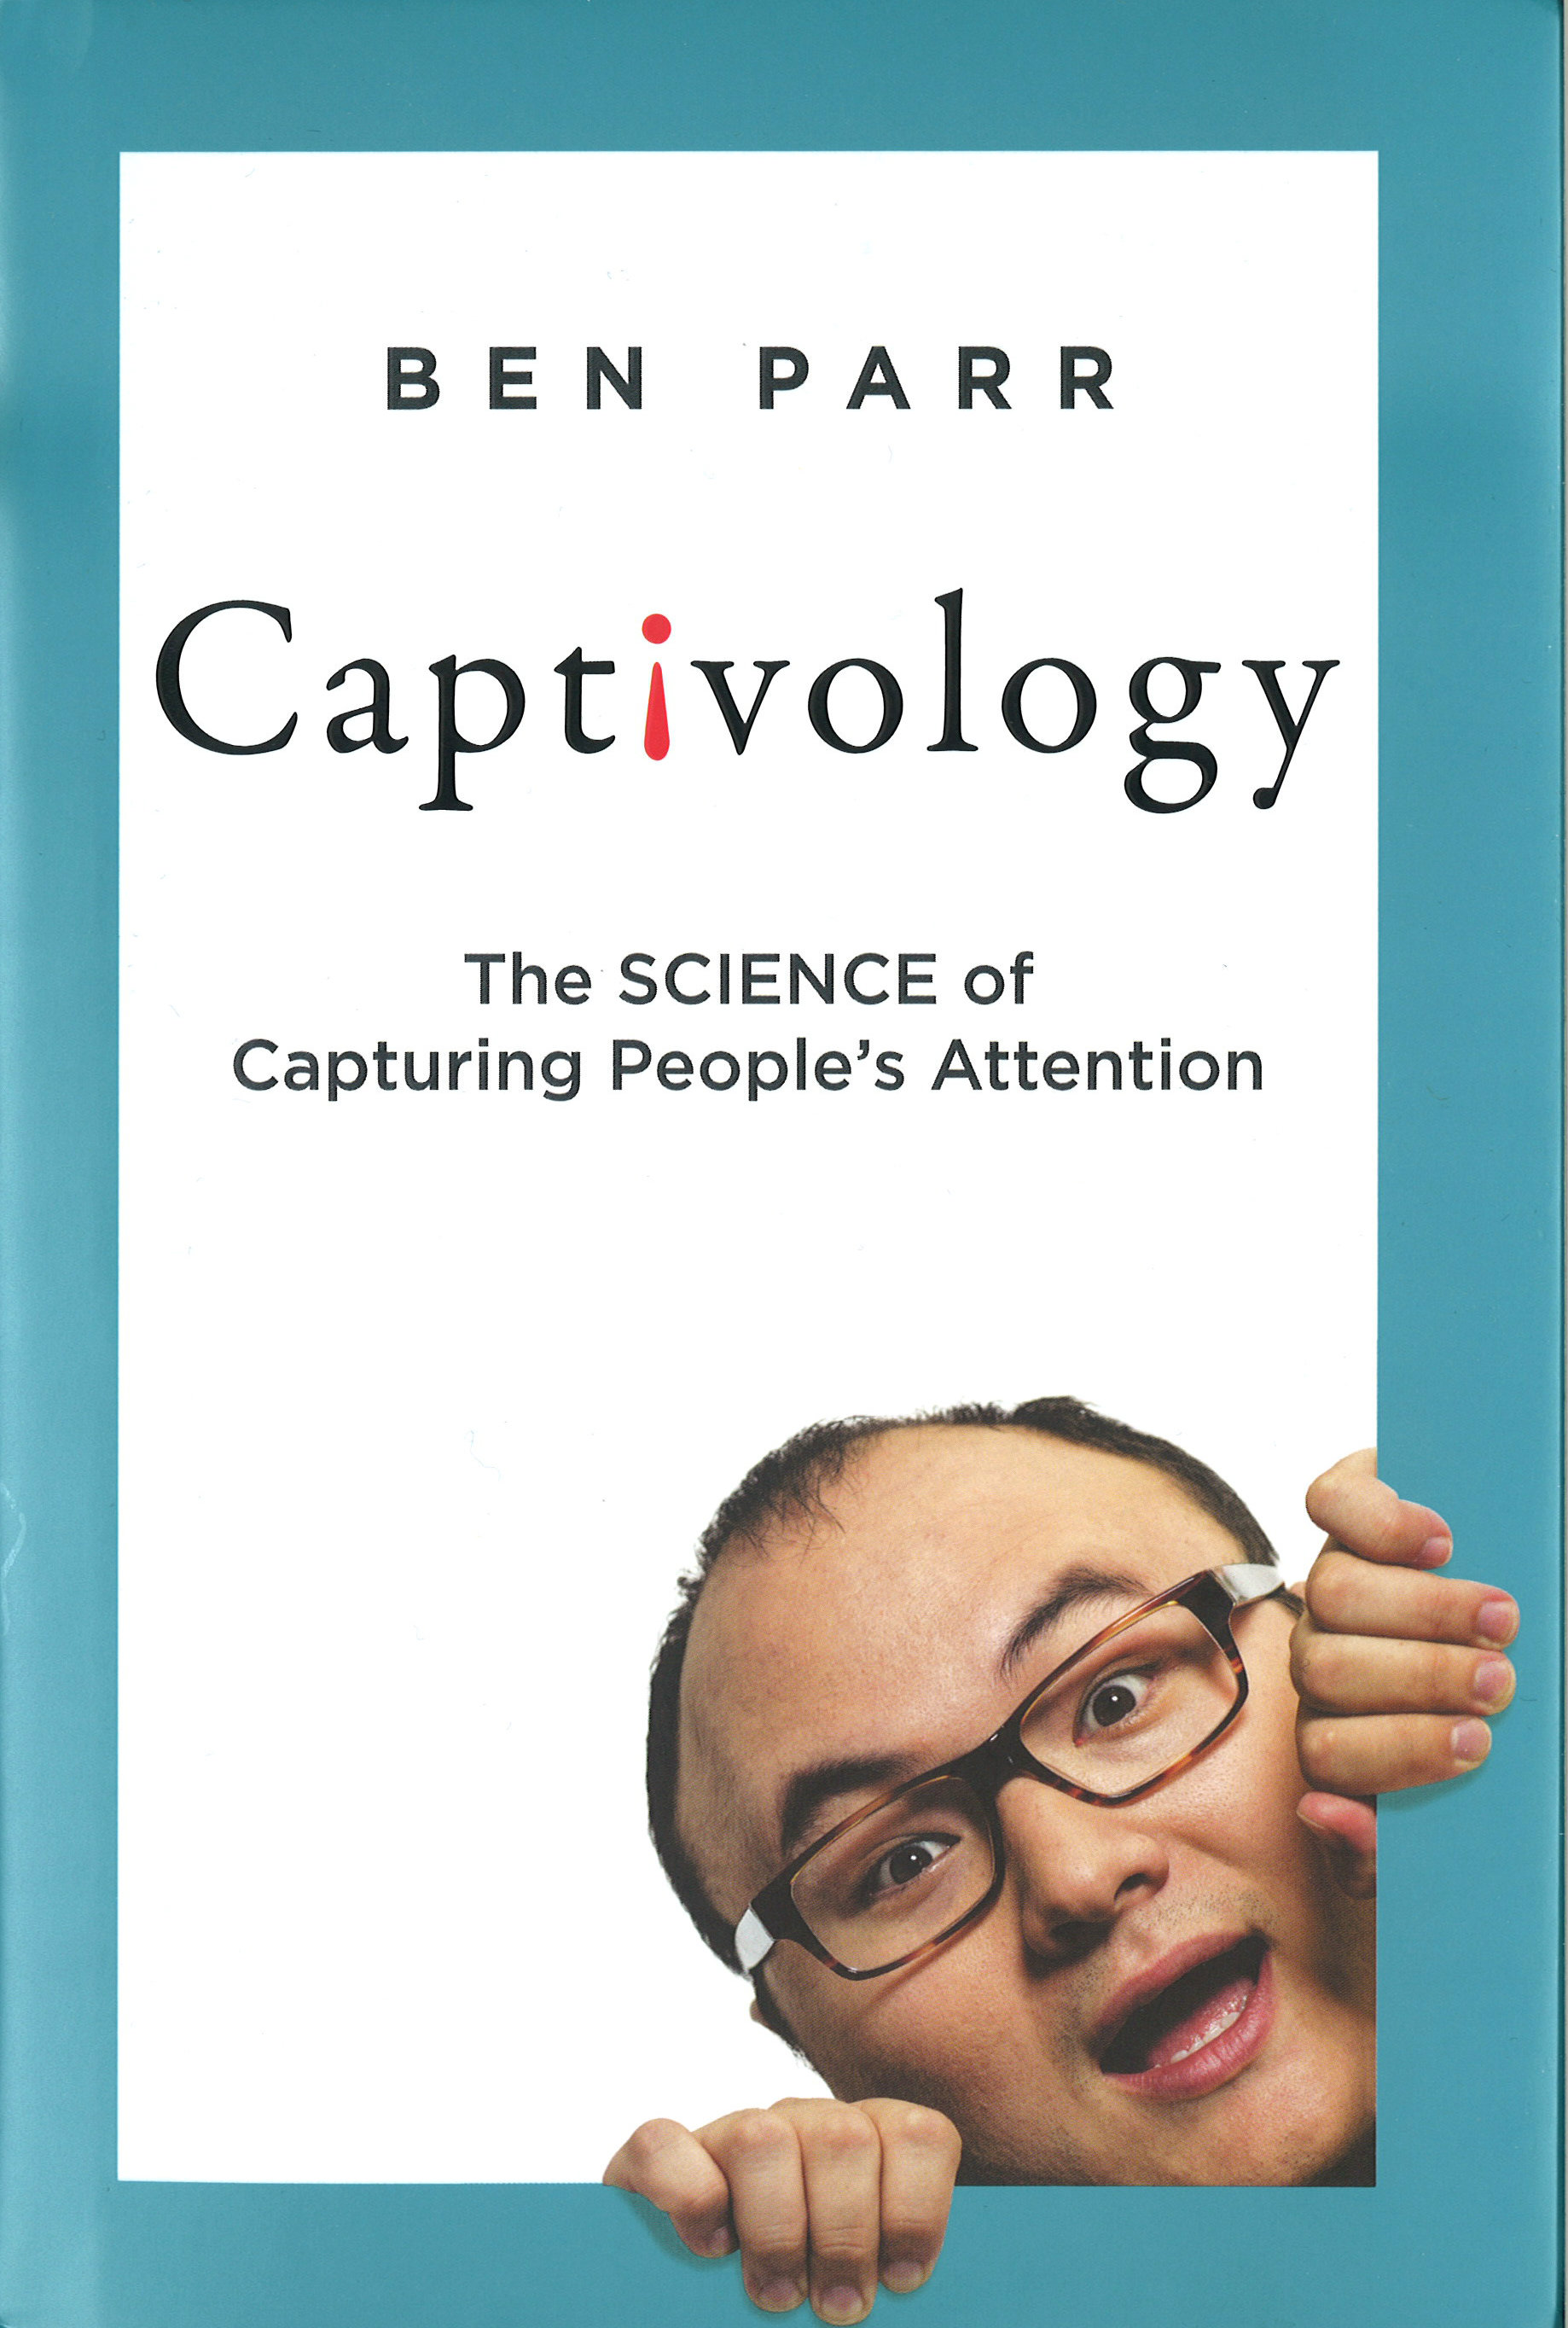 Captivology: The Science of Capturing People’s Attention